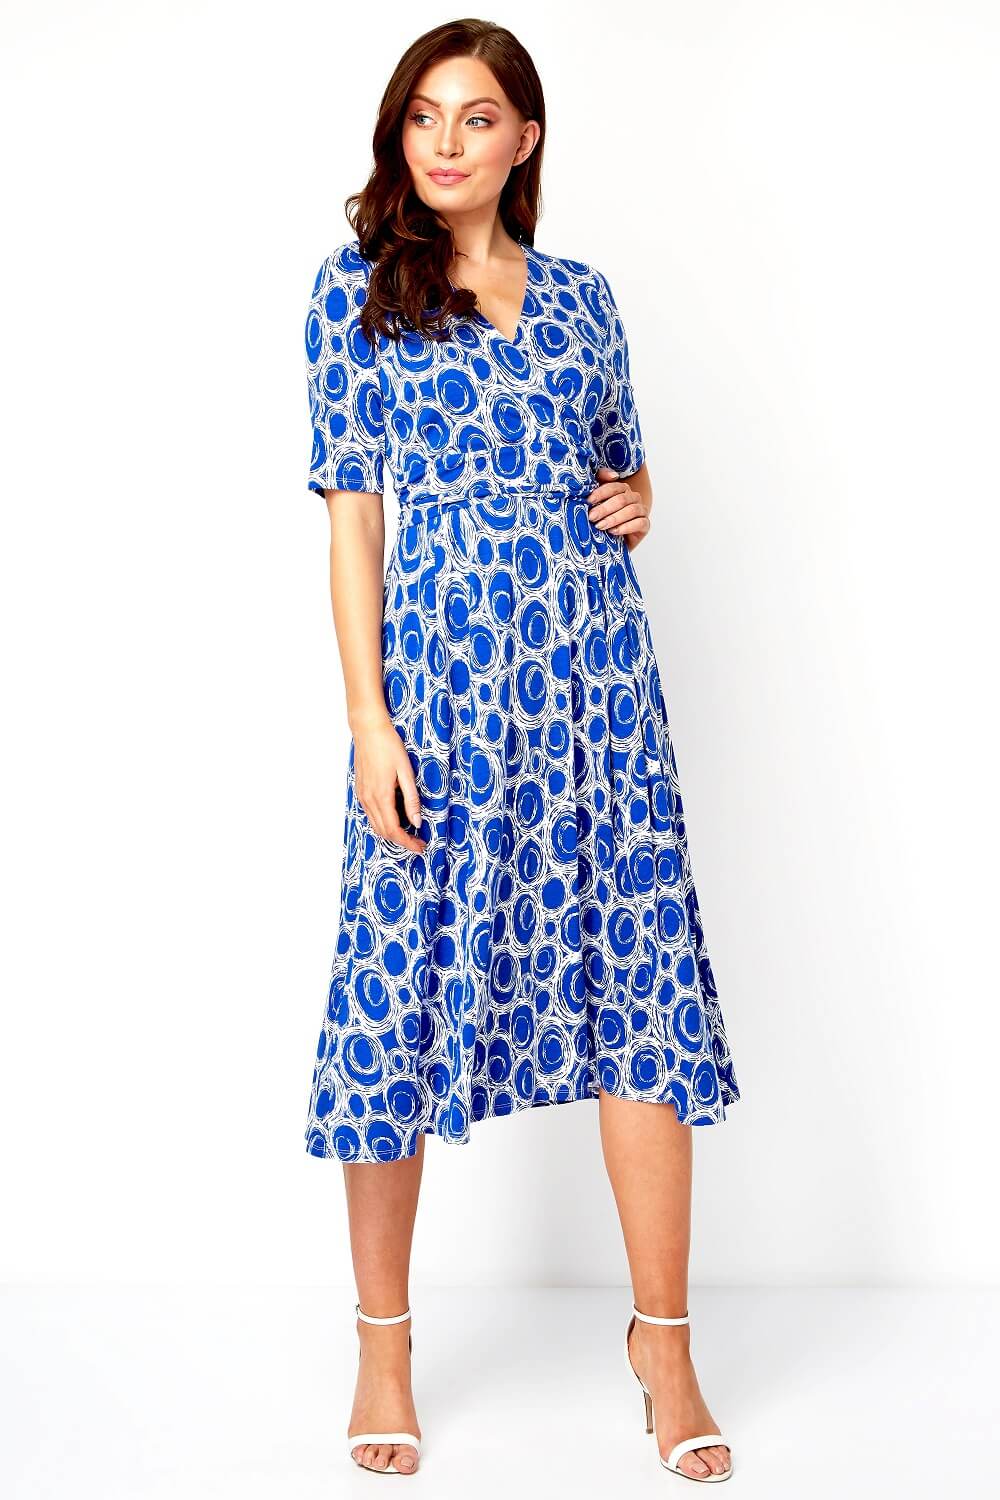 Royal Blue Spot Printed Fit and Flare Dress, Image 2 of 5